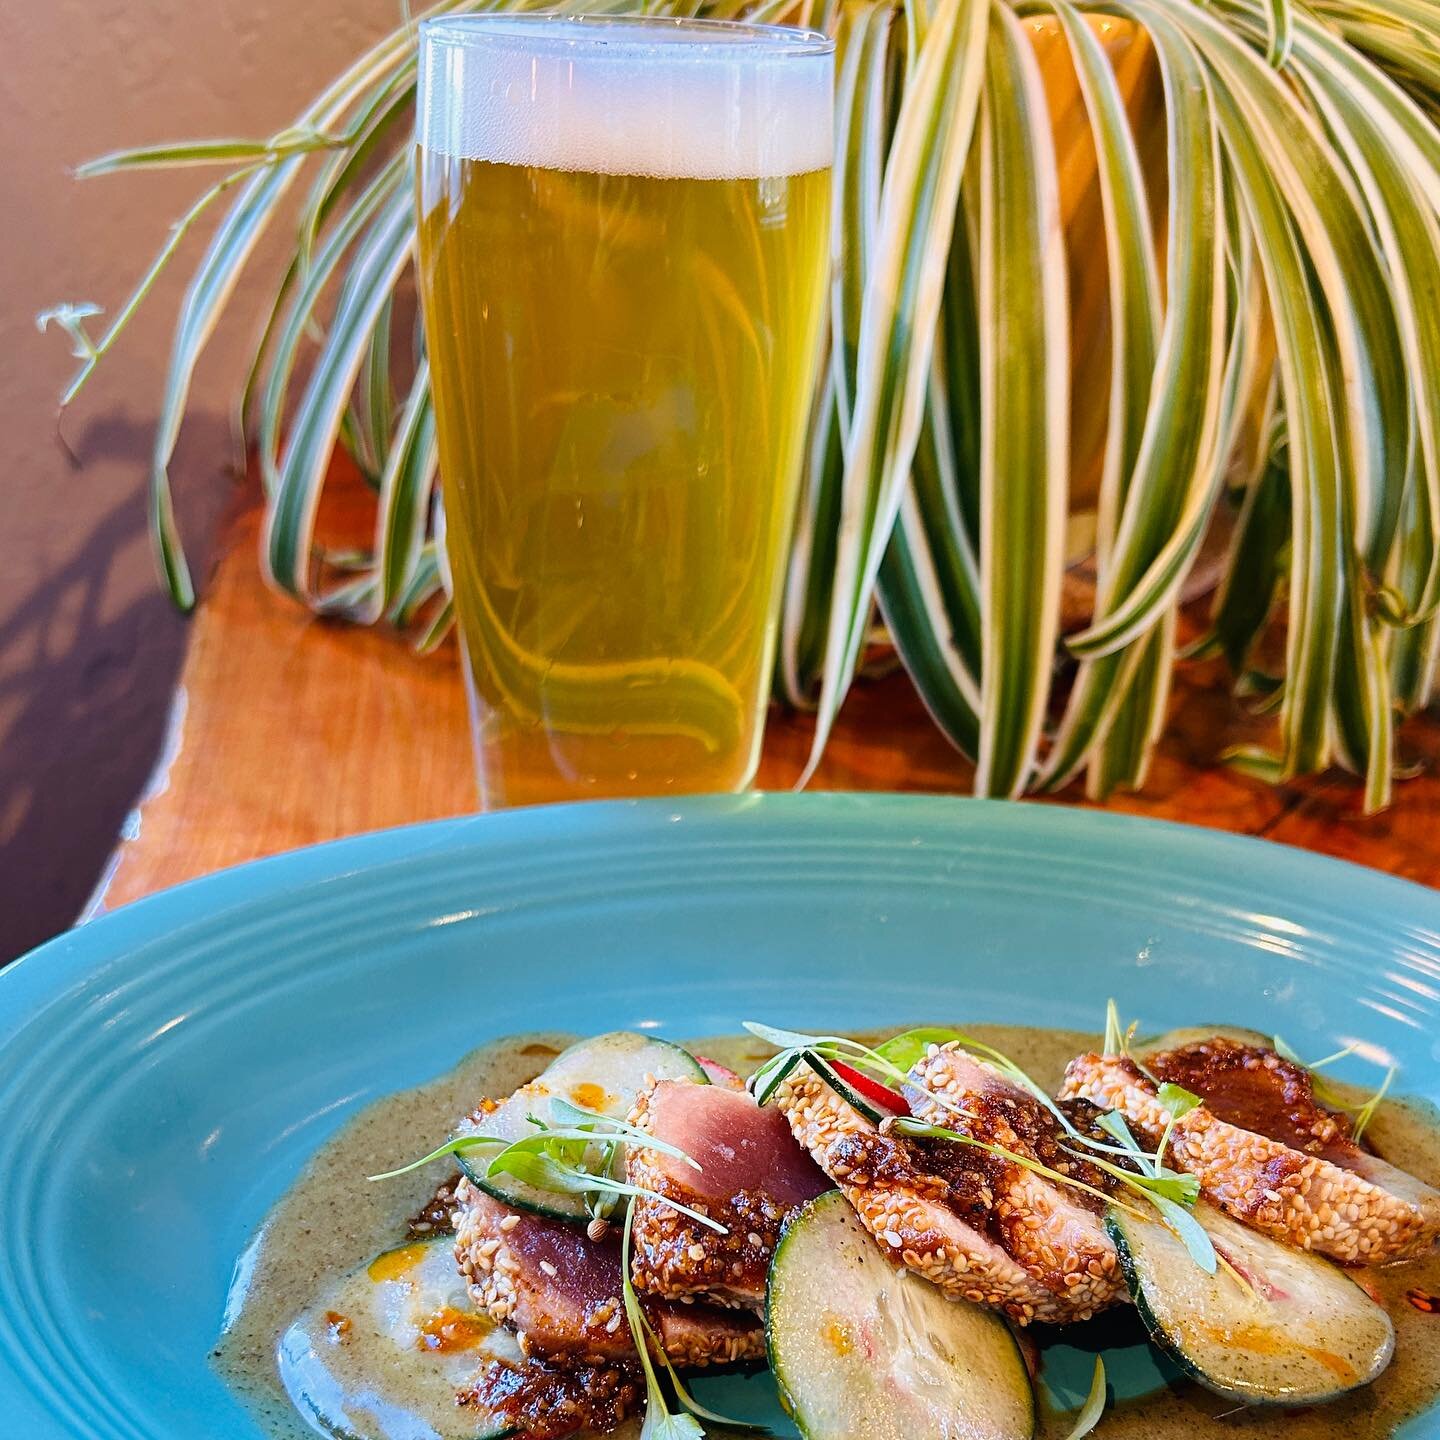 💘Happy Valentine&rsquo;s Day💘 

Join Atmosphere Kitchen &amp; DSB Beer Garden for our Year of the Dragon Valentine&rsquo;s Dinner! 🐉 
Lead Chef @klobene curated this amazing 5-Course Menu:

1️⃣ Tuna Tataki- Seared Sesame Tuna, Cashew Chili crunch,